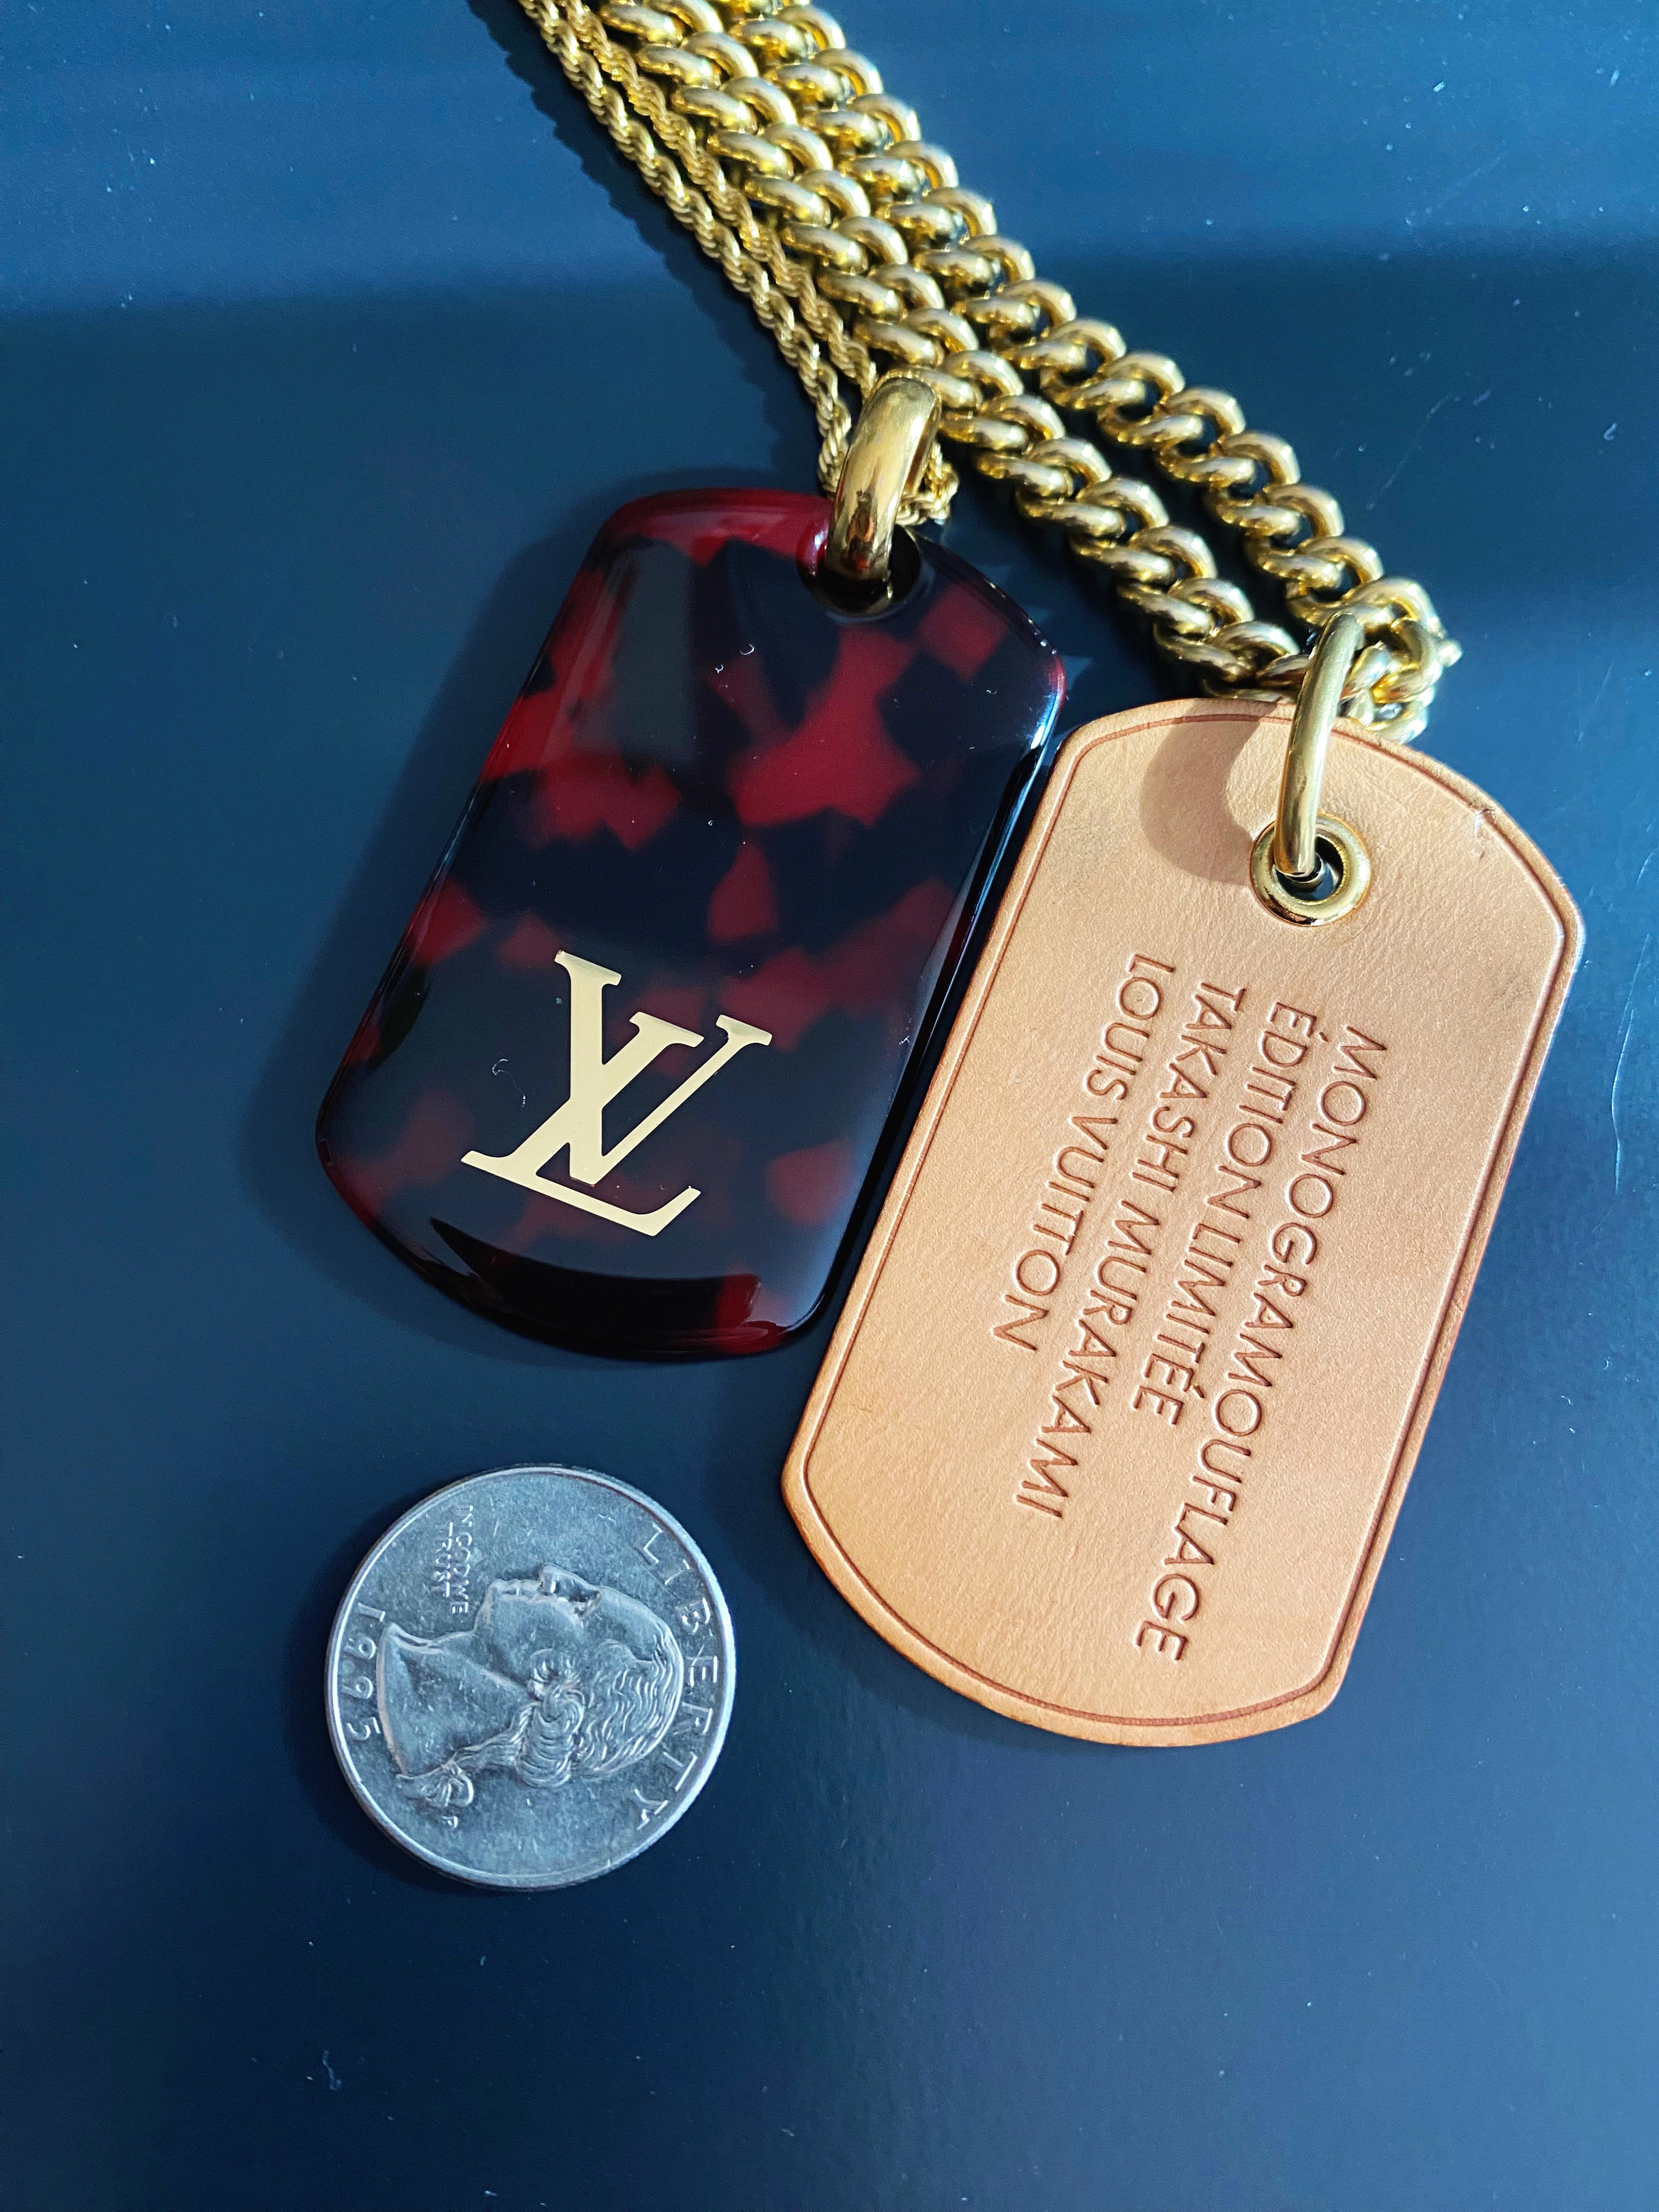 dog tag louis vuittons